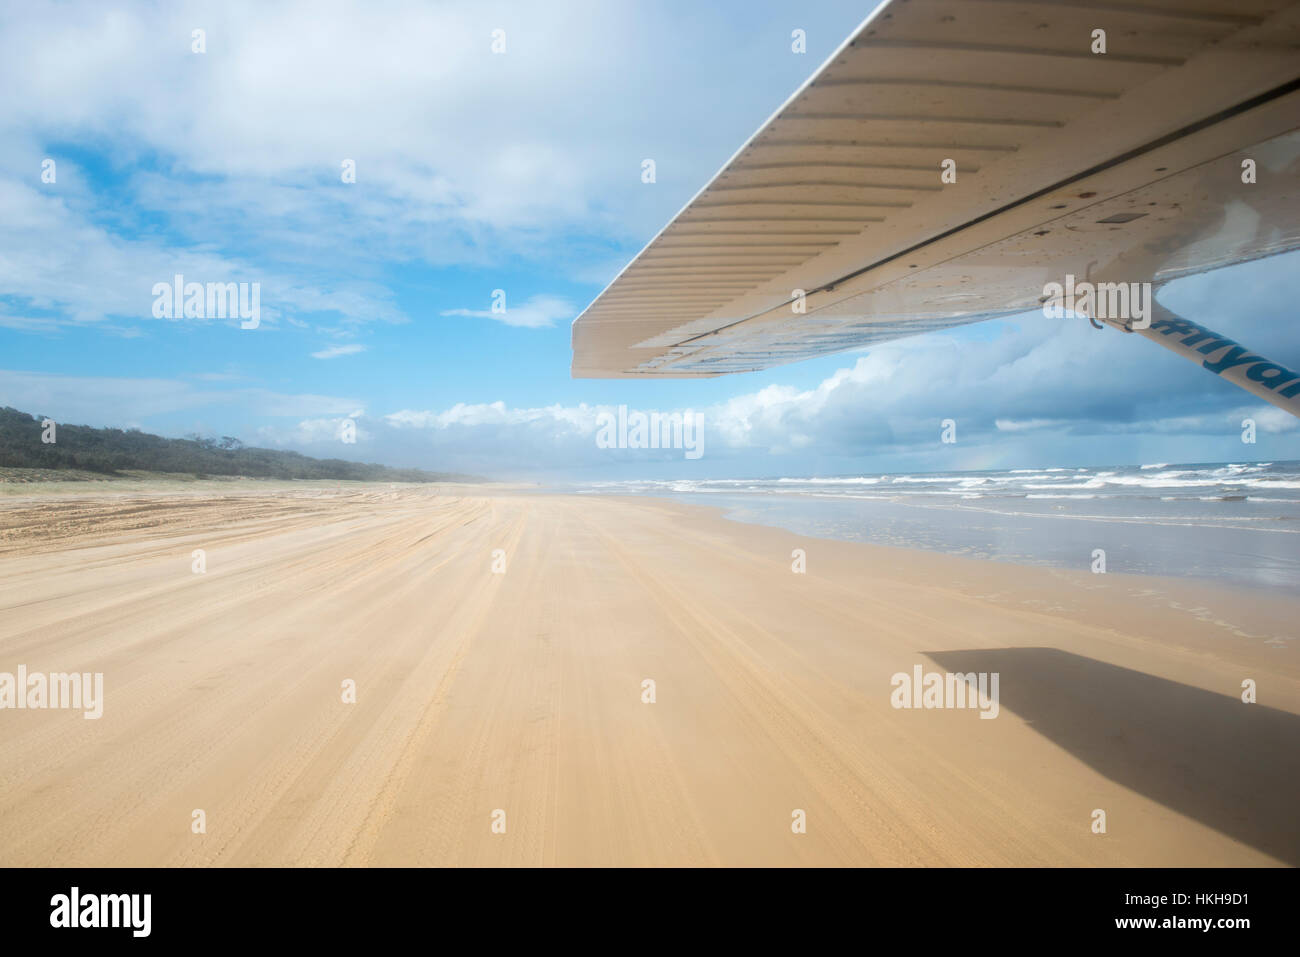 An airplane taking off from 75 Mile Beach on Fraser Island, Queensland Australia Stock Photo